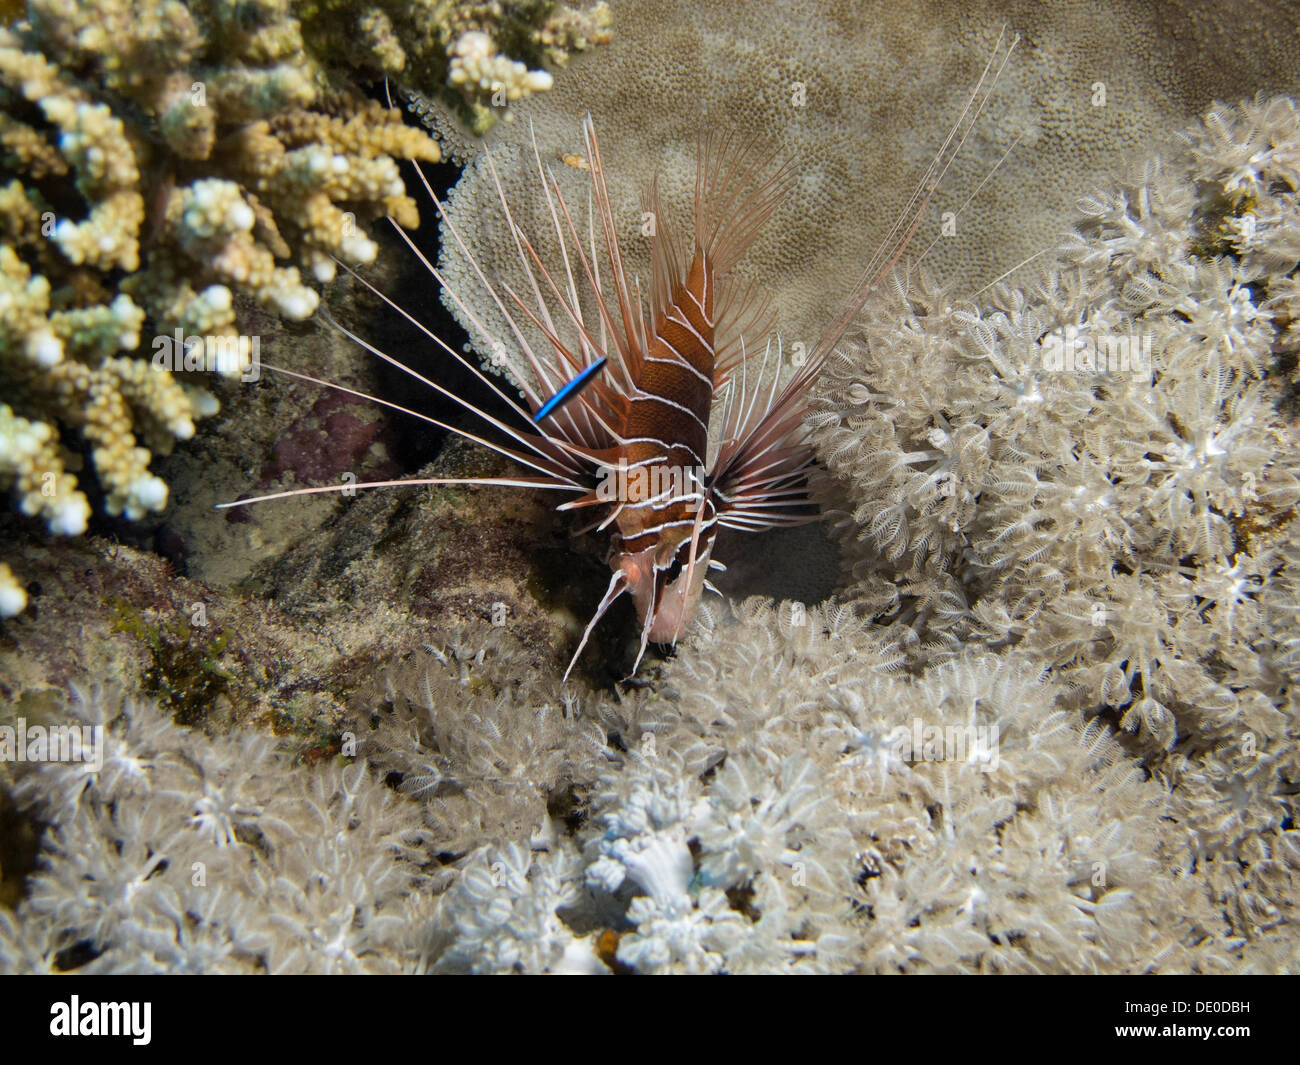 Clearfin Lionfish, Tailbar Lionfish or Radial Firefish (Pterois radiata), Mangrove Bay, Red Sea, Egypt, Africa Stock Photo